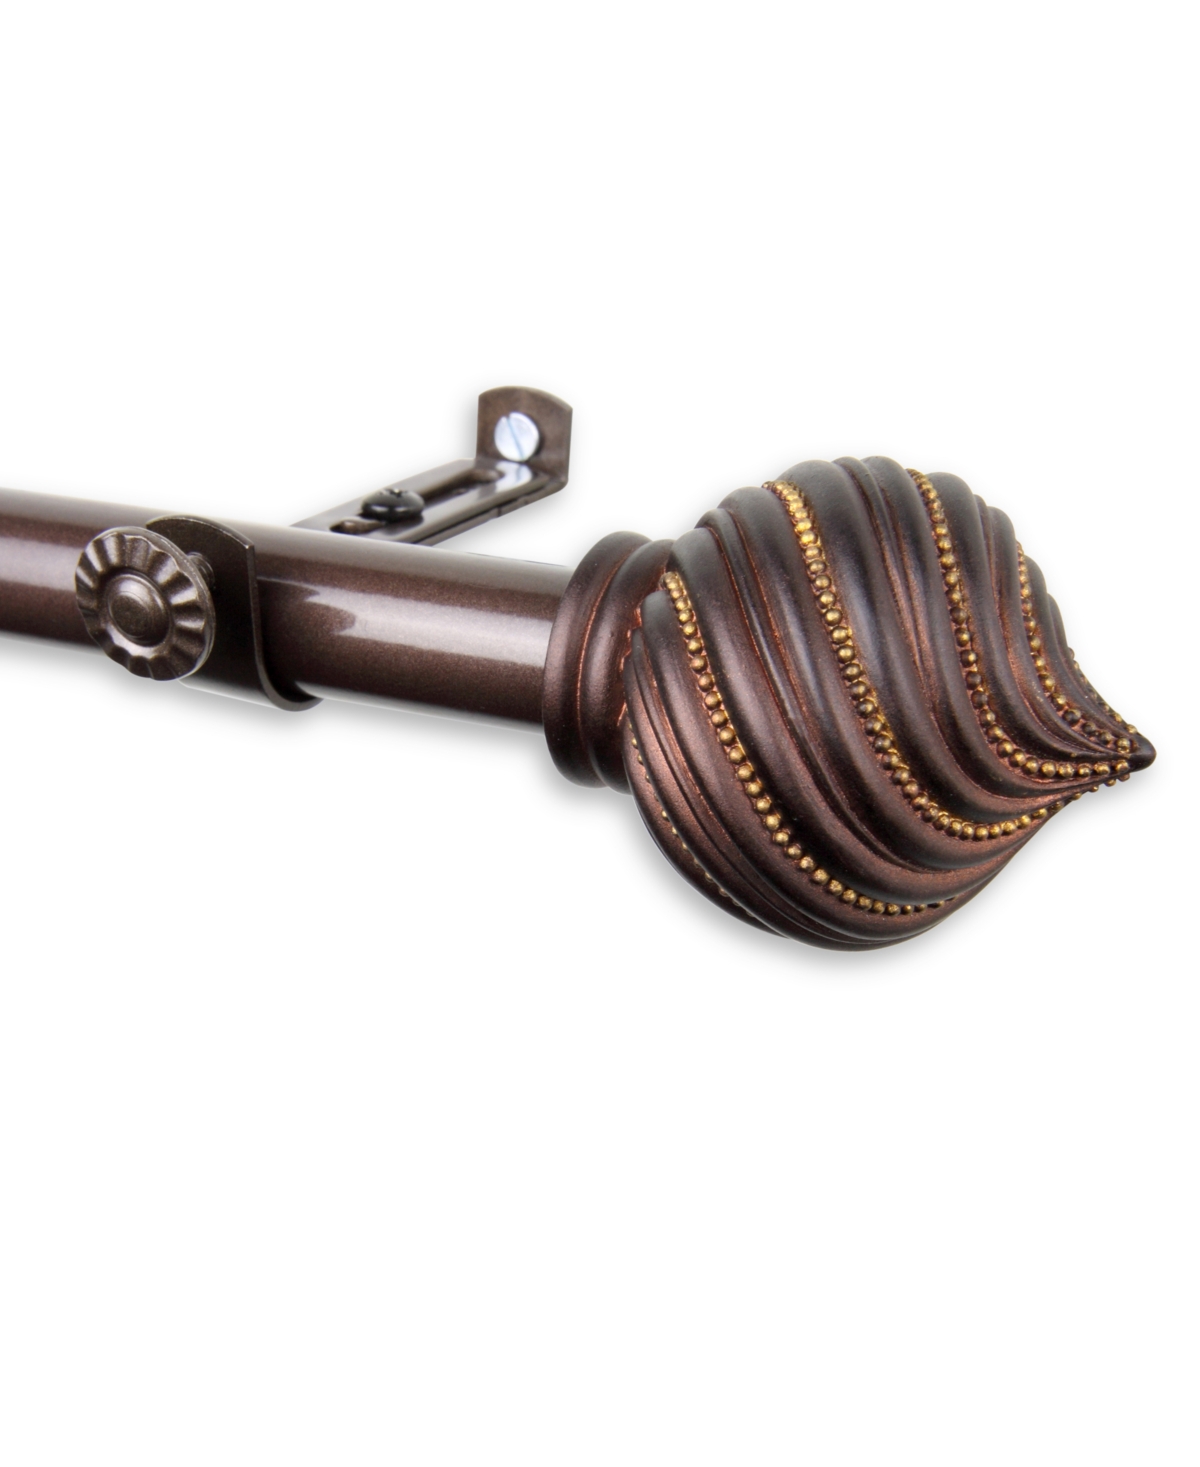 Bisque 13/16" Curtain Rod 120-170" - Cocoa